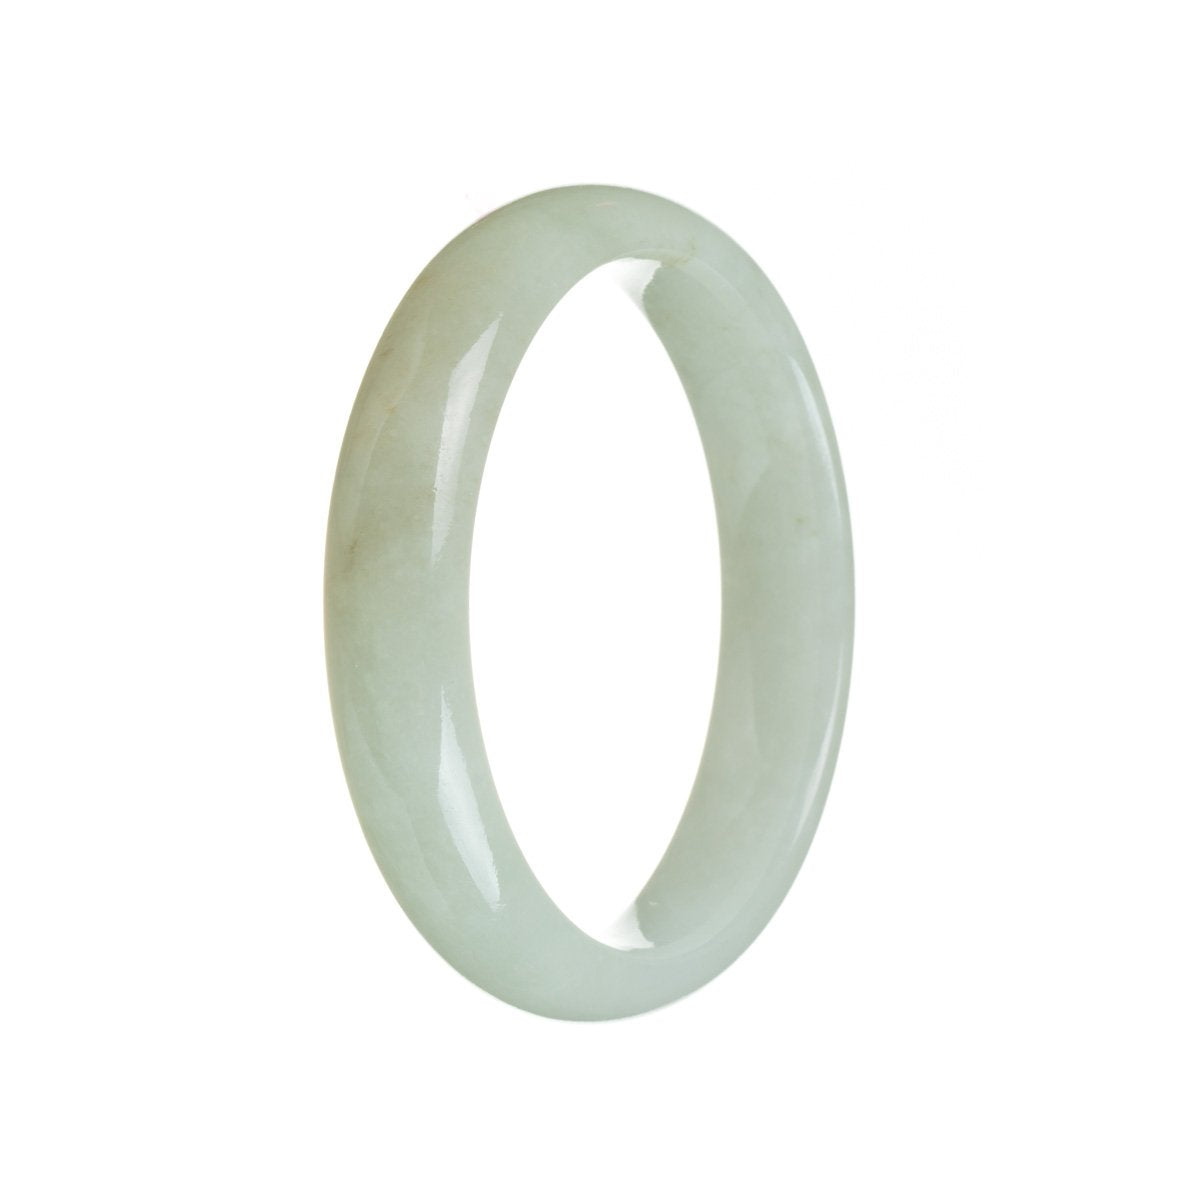 A close-up photo of a stunning white jadeite bracelet with a 56mm half moon design. The bracelet is made of genuine grade A white jadeite, known for its high quality and beautiful appearance. It is a luxurious and elegant piece of jewelry from the brand MAYS™.